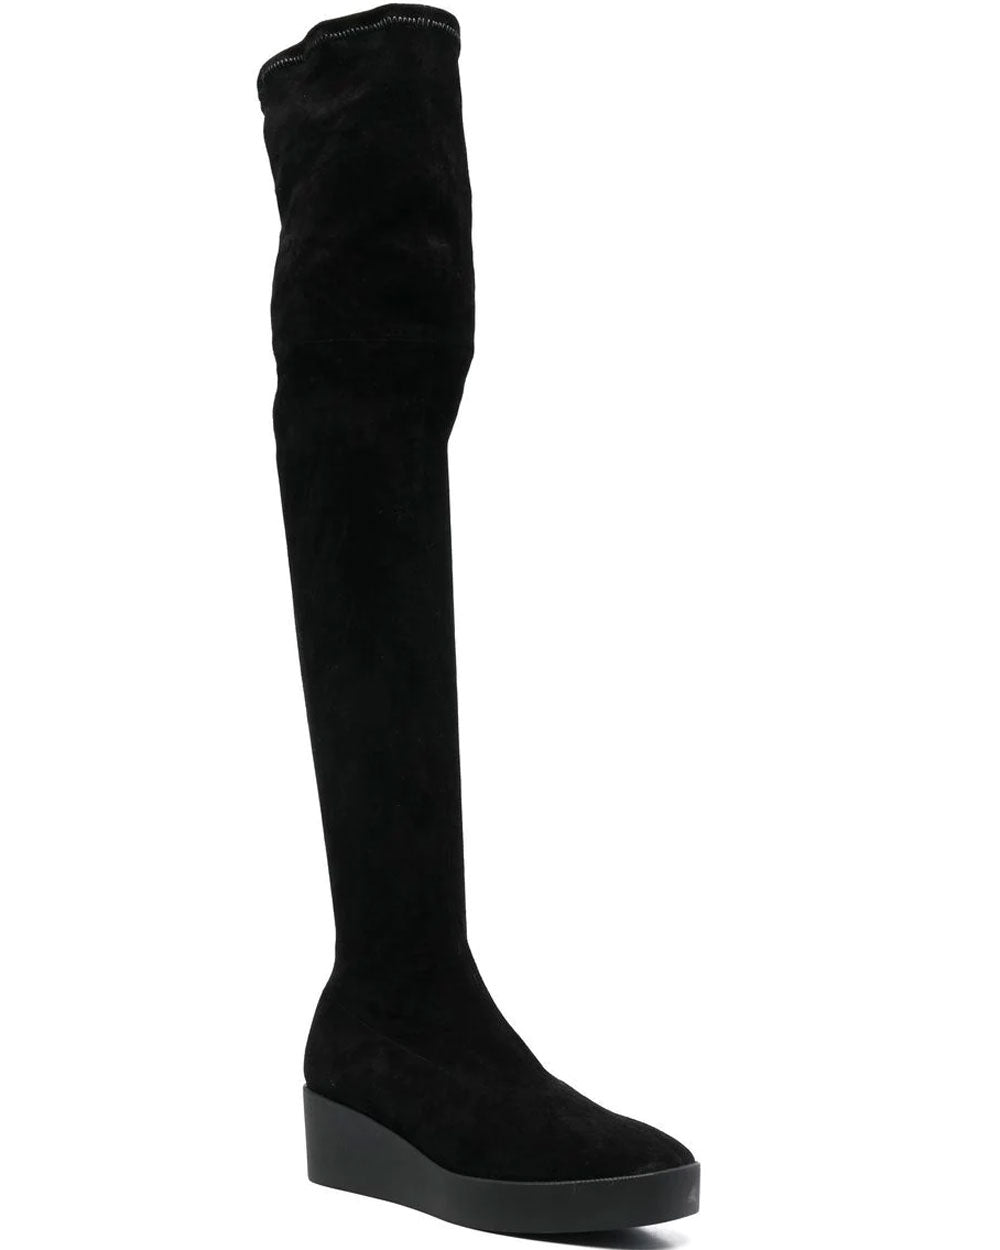 Lorna Over the Knee Boot in Black